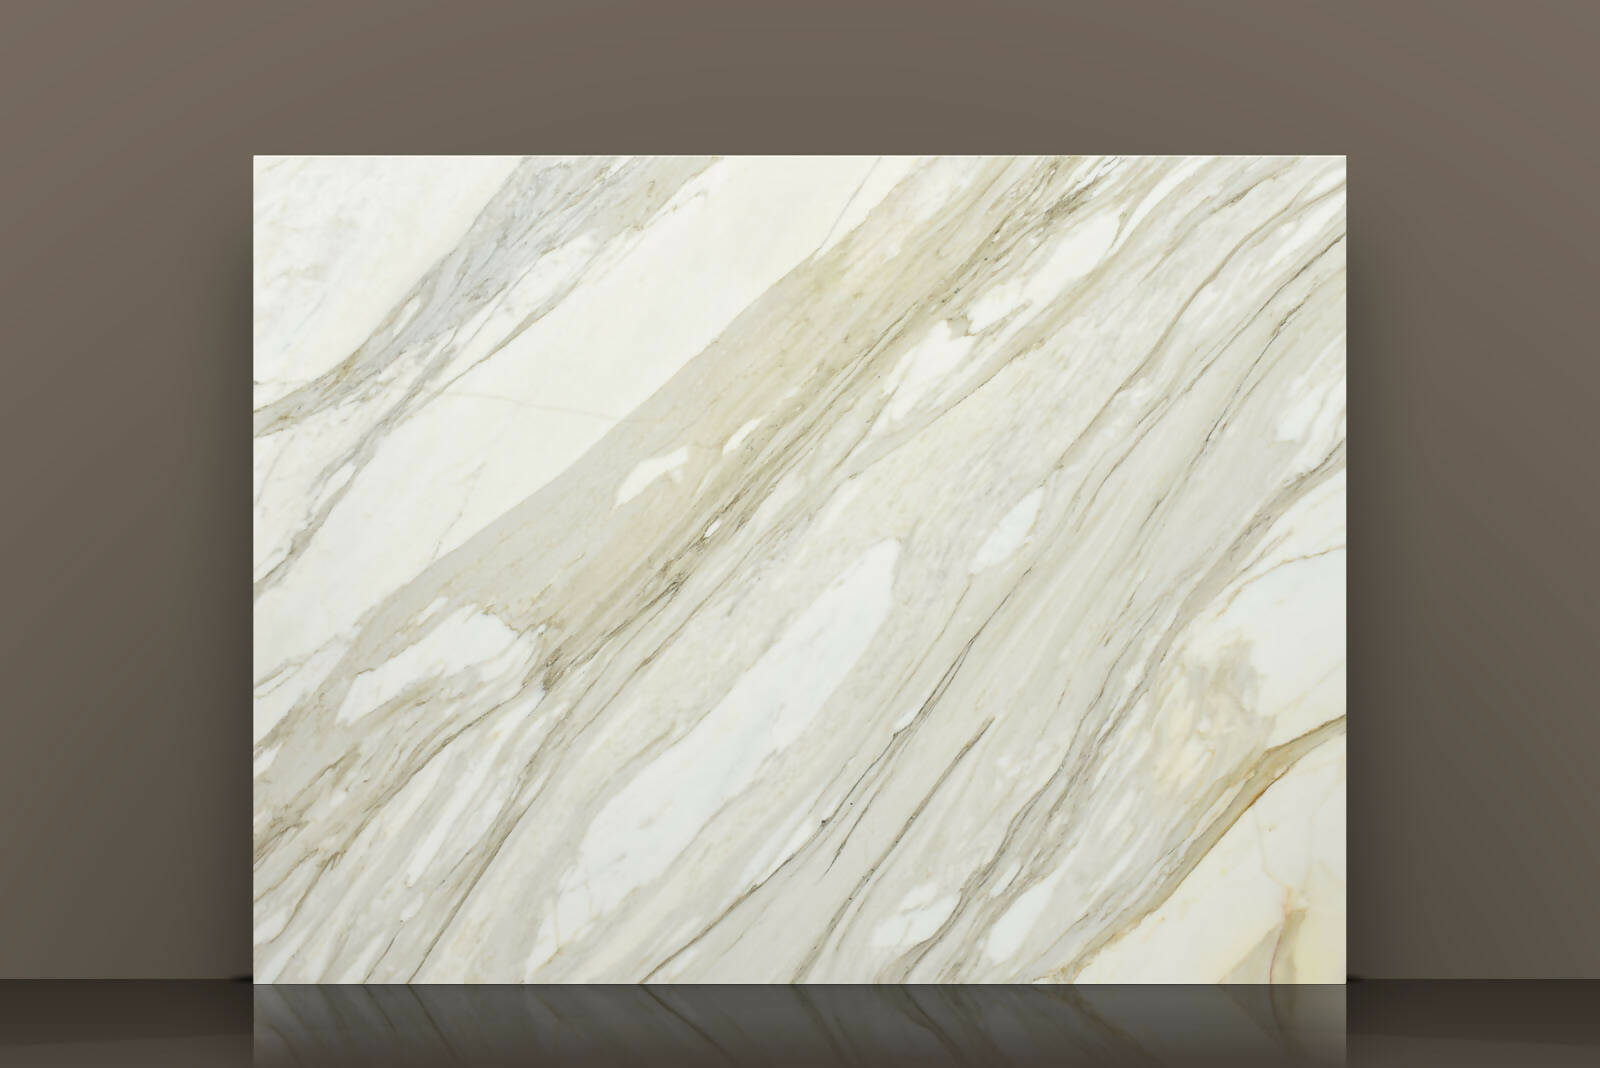 CALACATTA GOLD MACCHIA ANTICA BOOKMATCHED MARBLE,Marble,Sonic Stone,www.work-tops.com